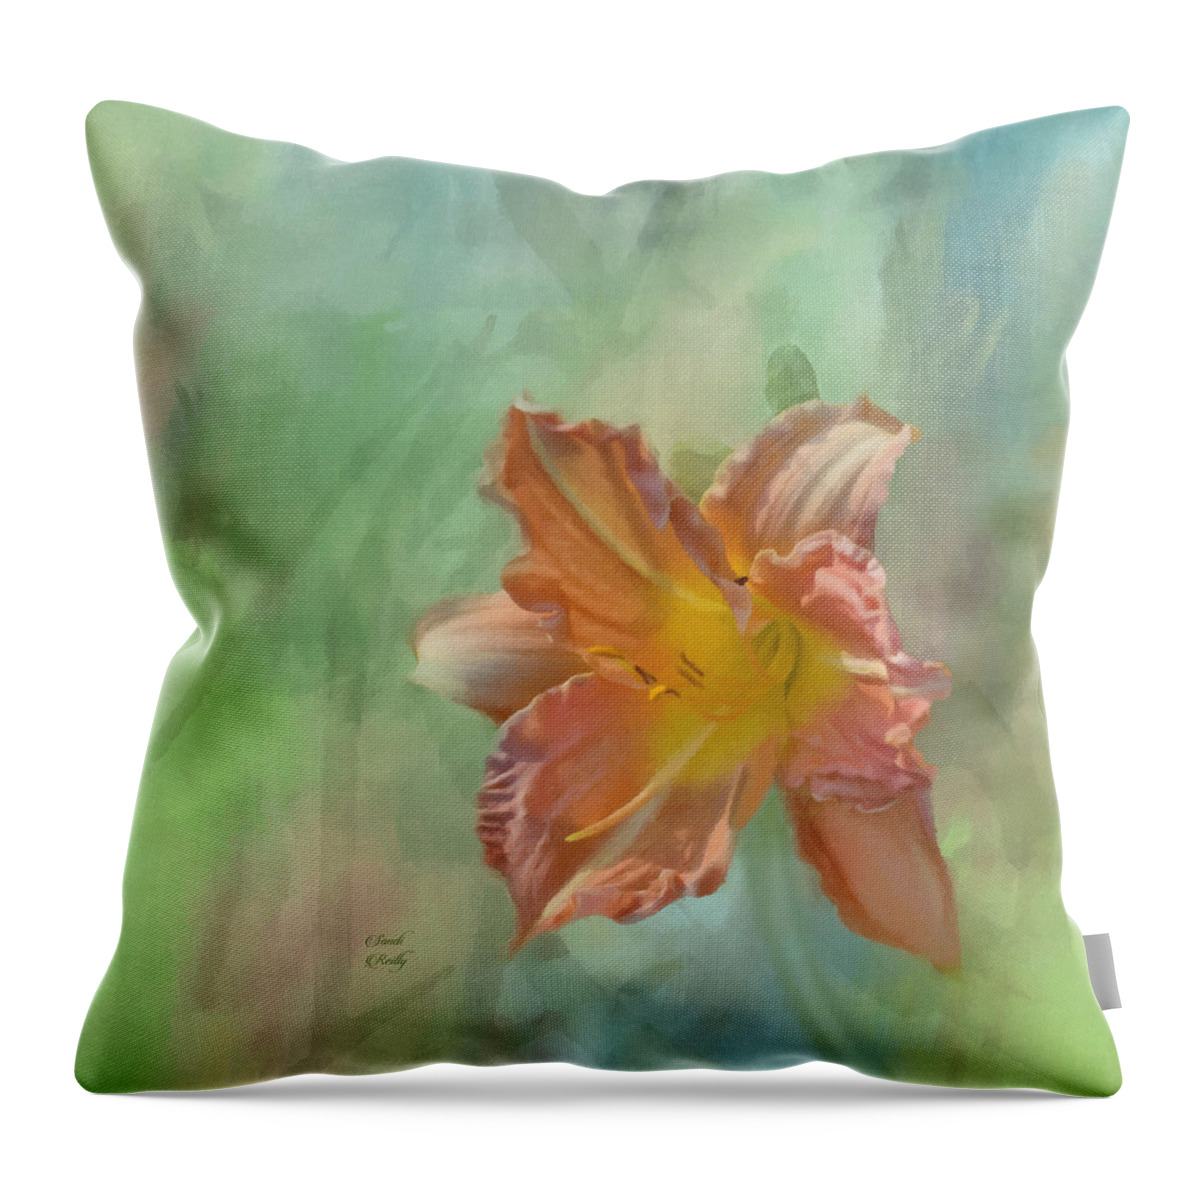 Toyland Peach Daylily Painted Throw Pillow featuring the photograph Fancy Toyland Peach Daylily by Sandi OReilly